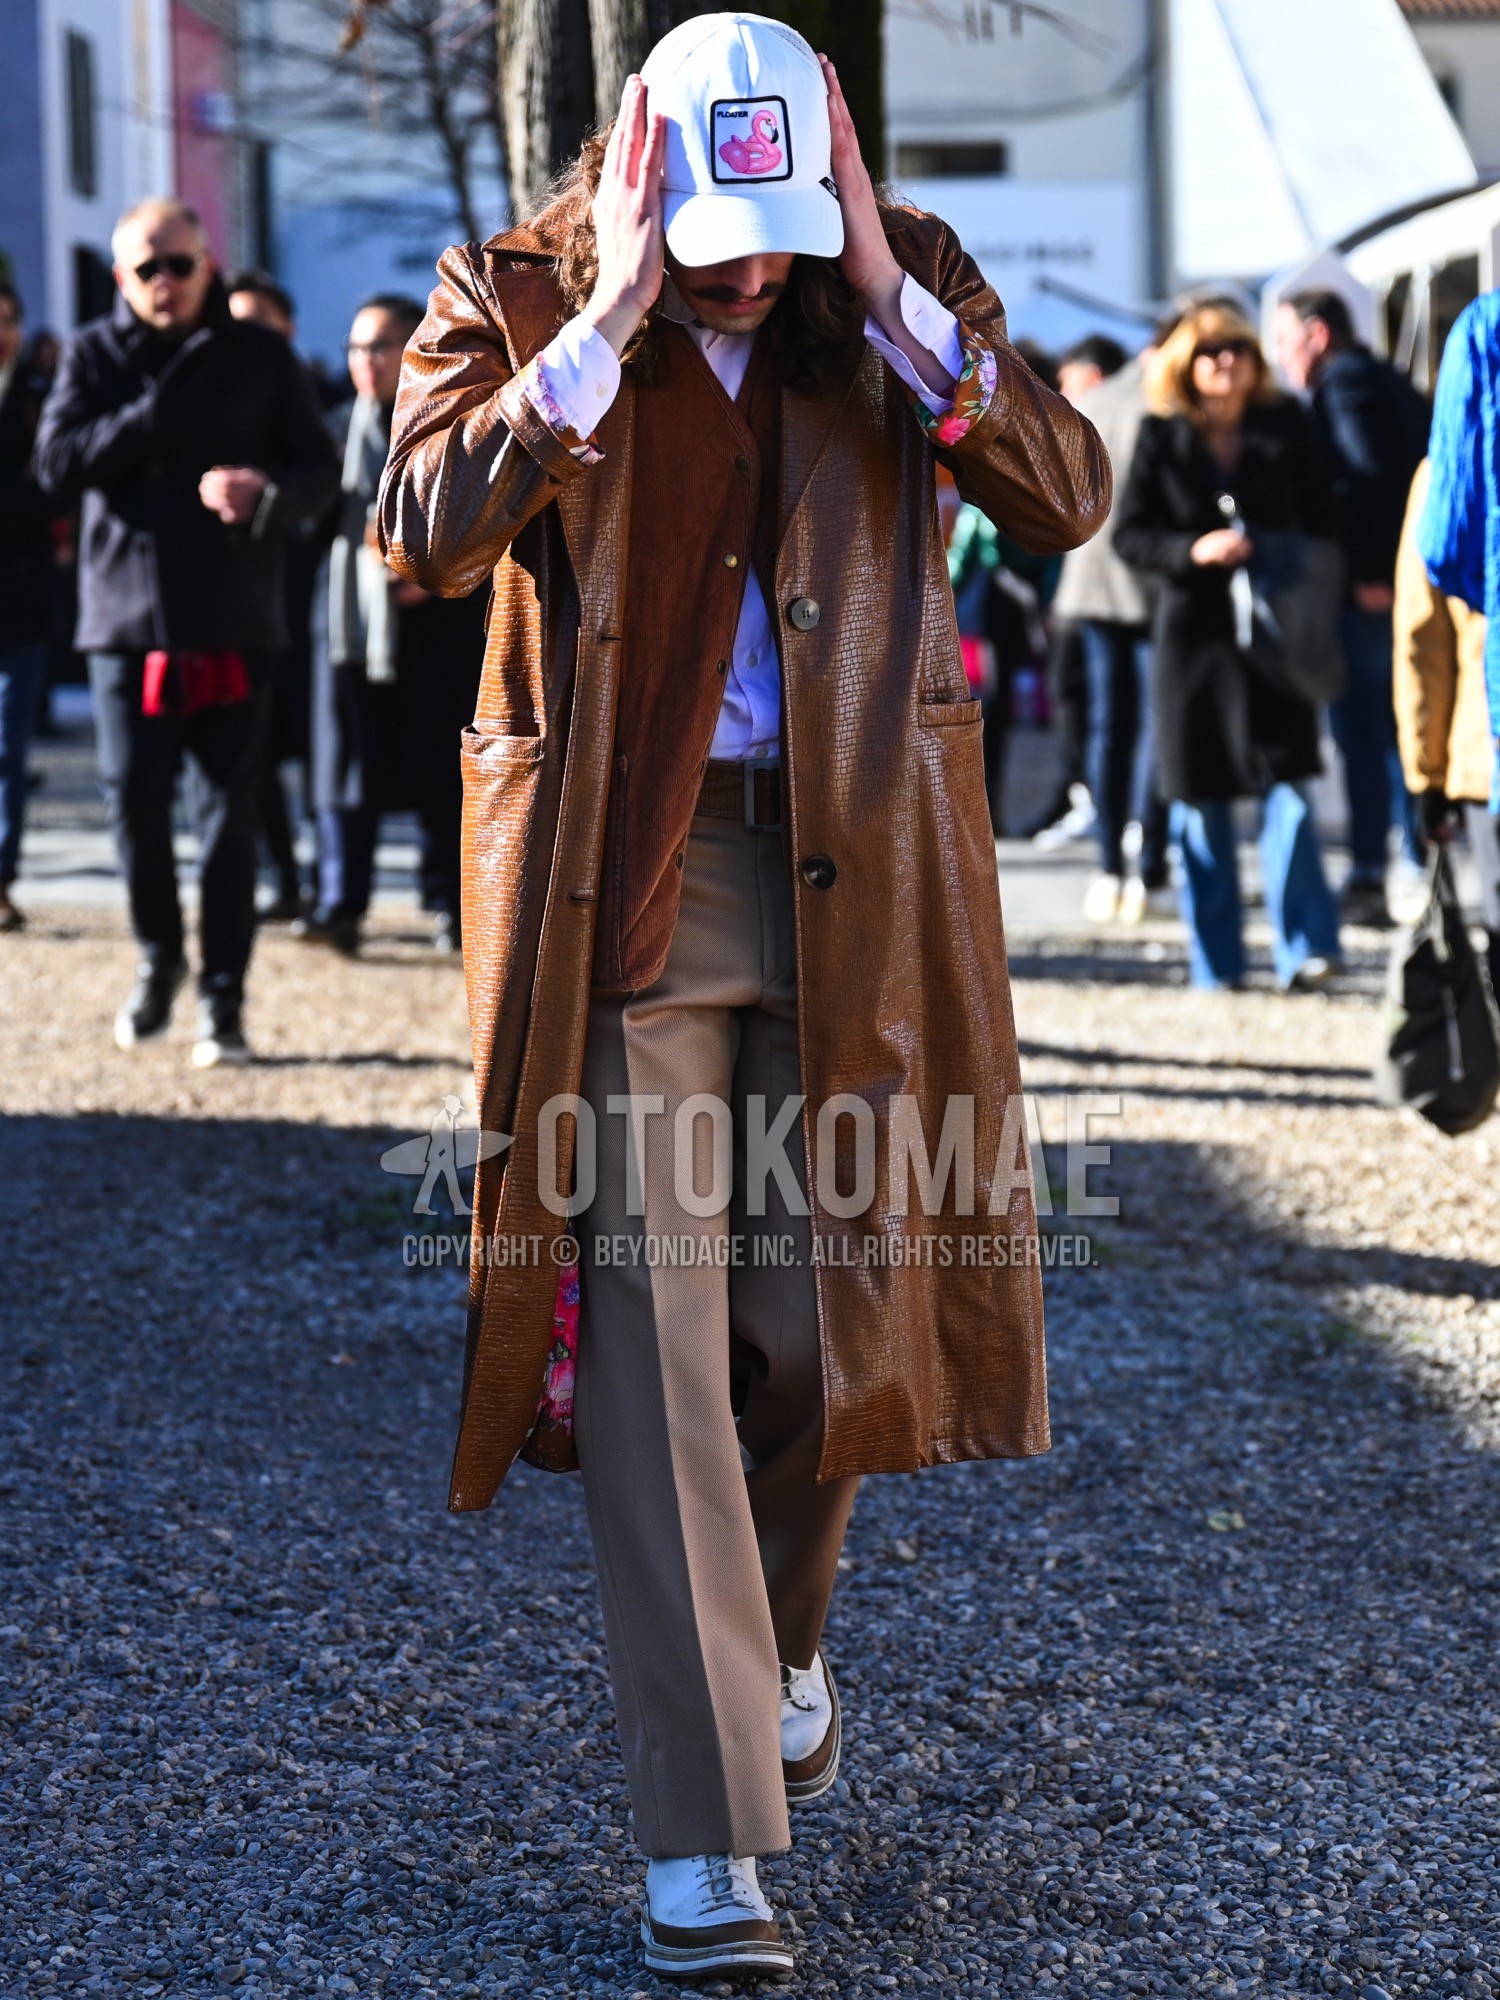 Men's autumn winter outfit with white pink one point baseball cap, brown plain ulster coat, brown plain outerwear, brown plain quilted jacket, pink plain shirt, brown plain leather belt, beige plain slacks, white brown low-cut sneakers.